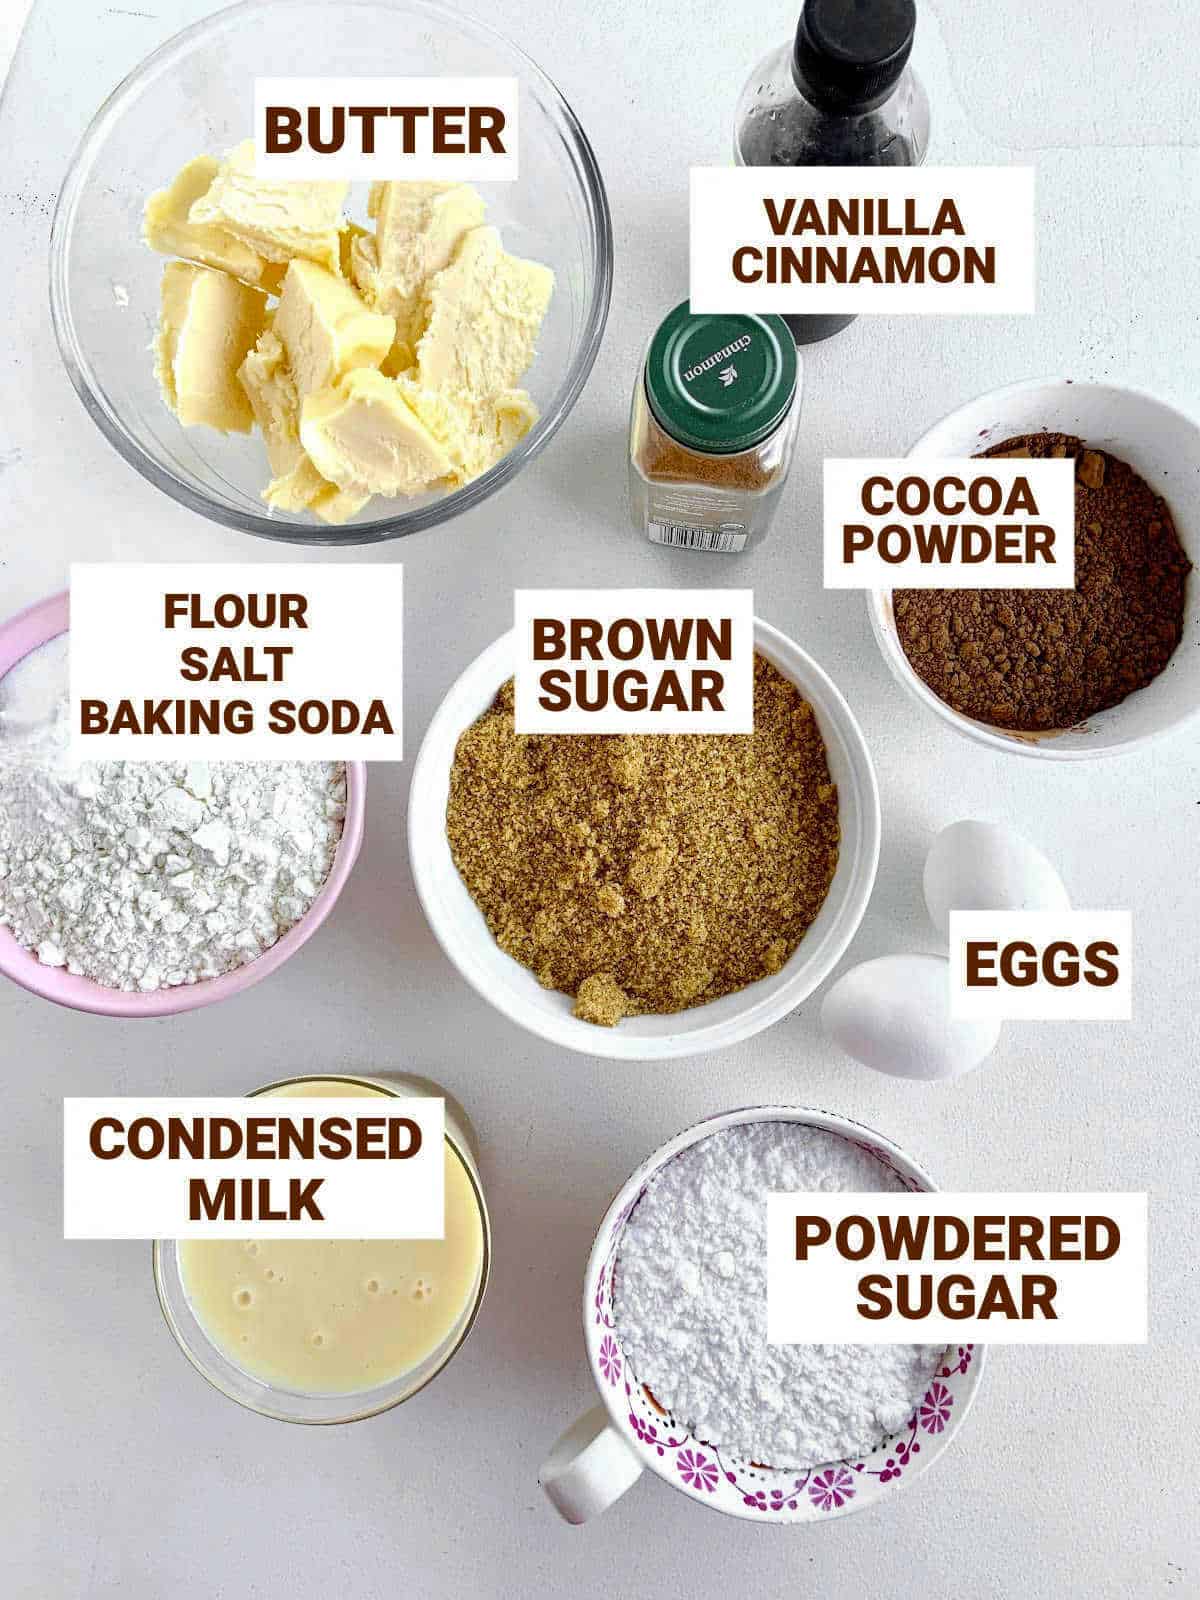 Bowls with chocolate cake ingredients on light colored surface including condensed milk, flavorings. Brown text overlay.